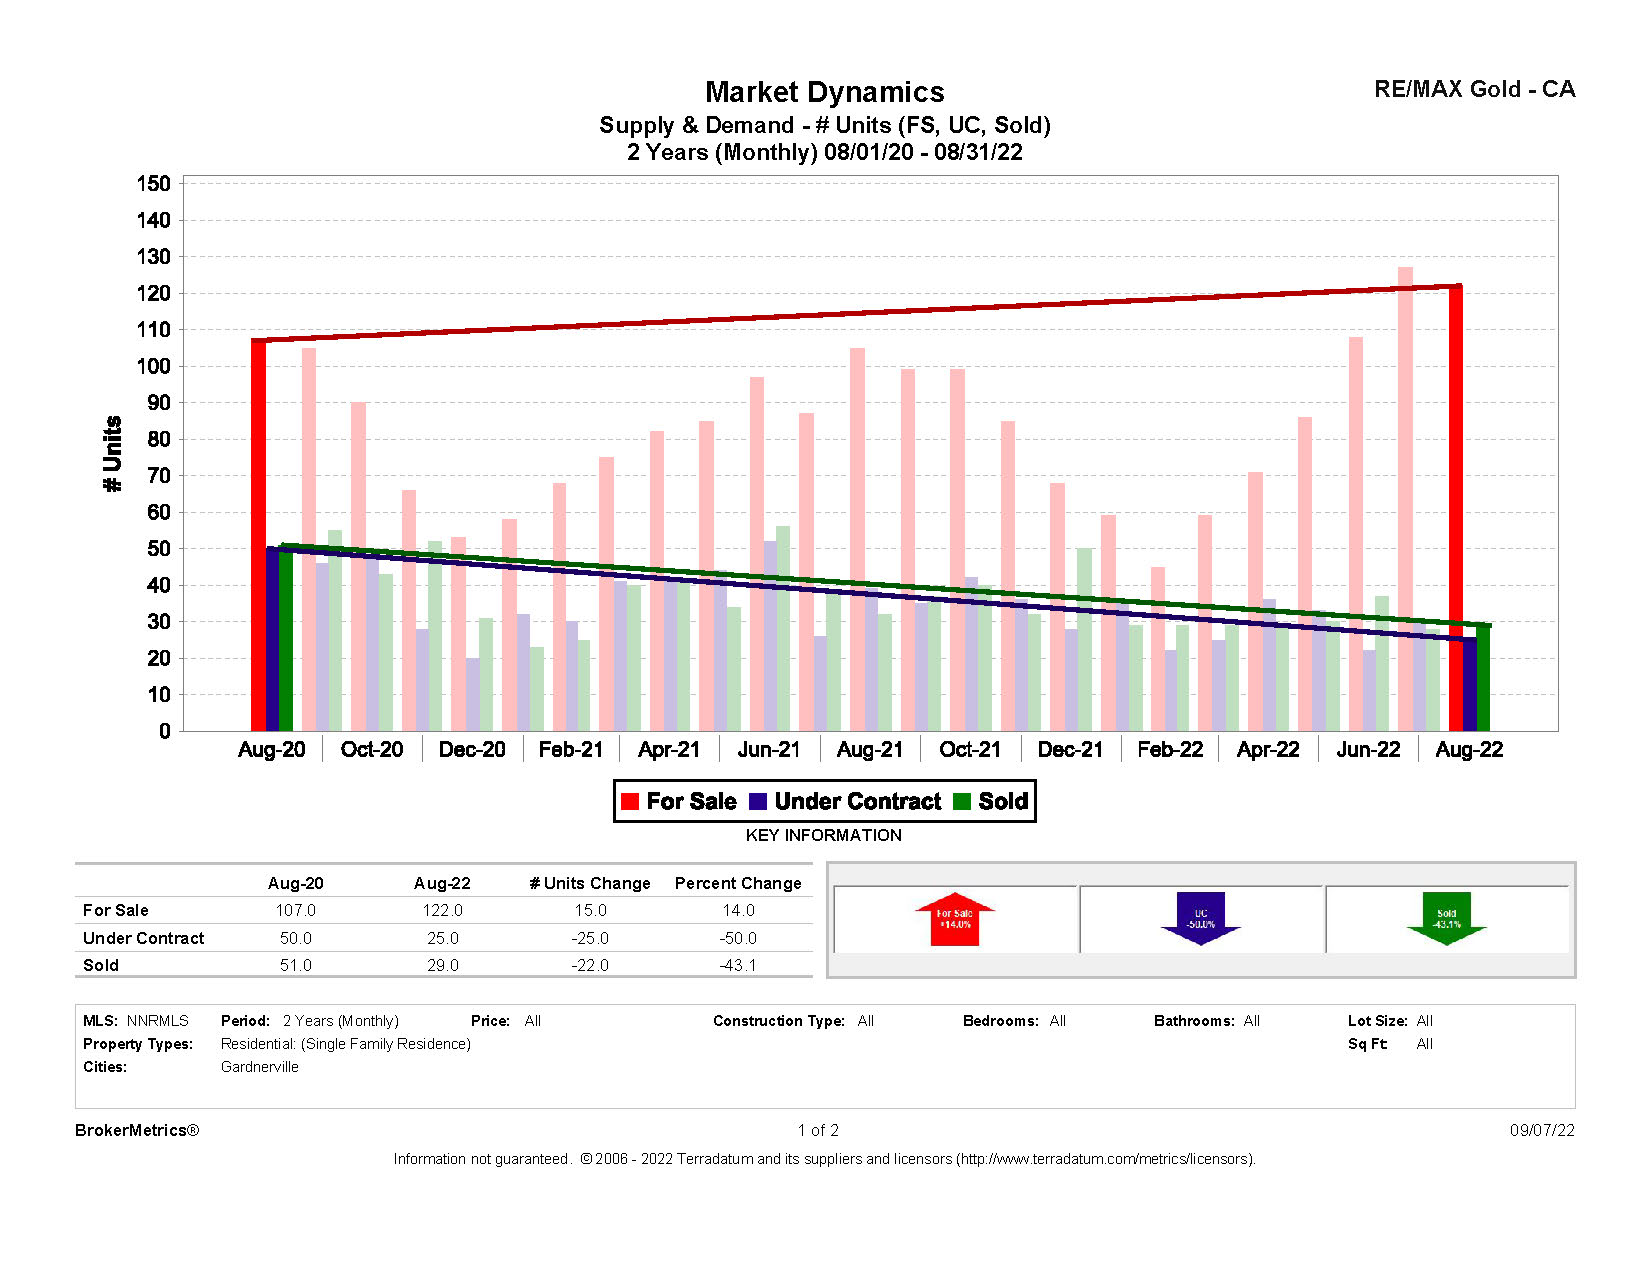 August 2022 Residential Stats: Supply & Demand graph for Gardnerville, NV